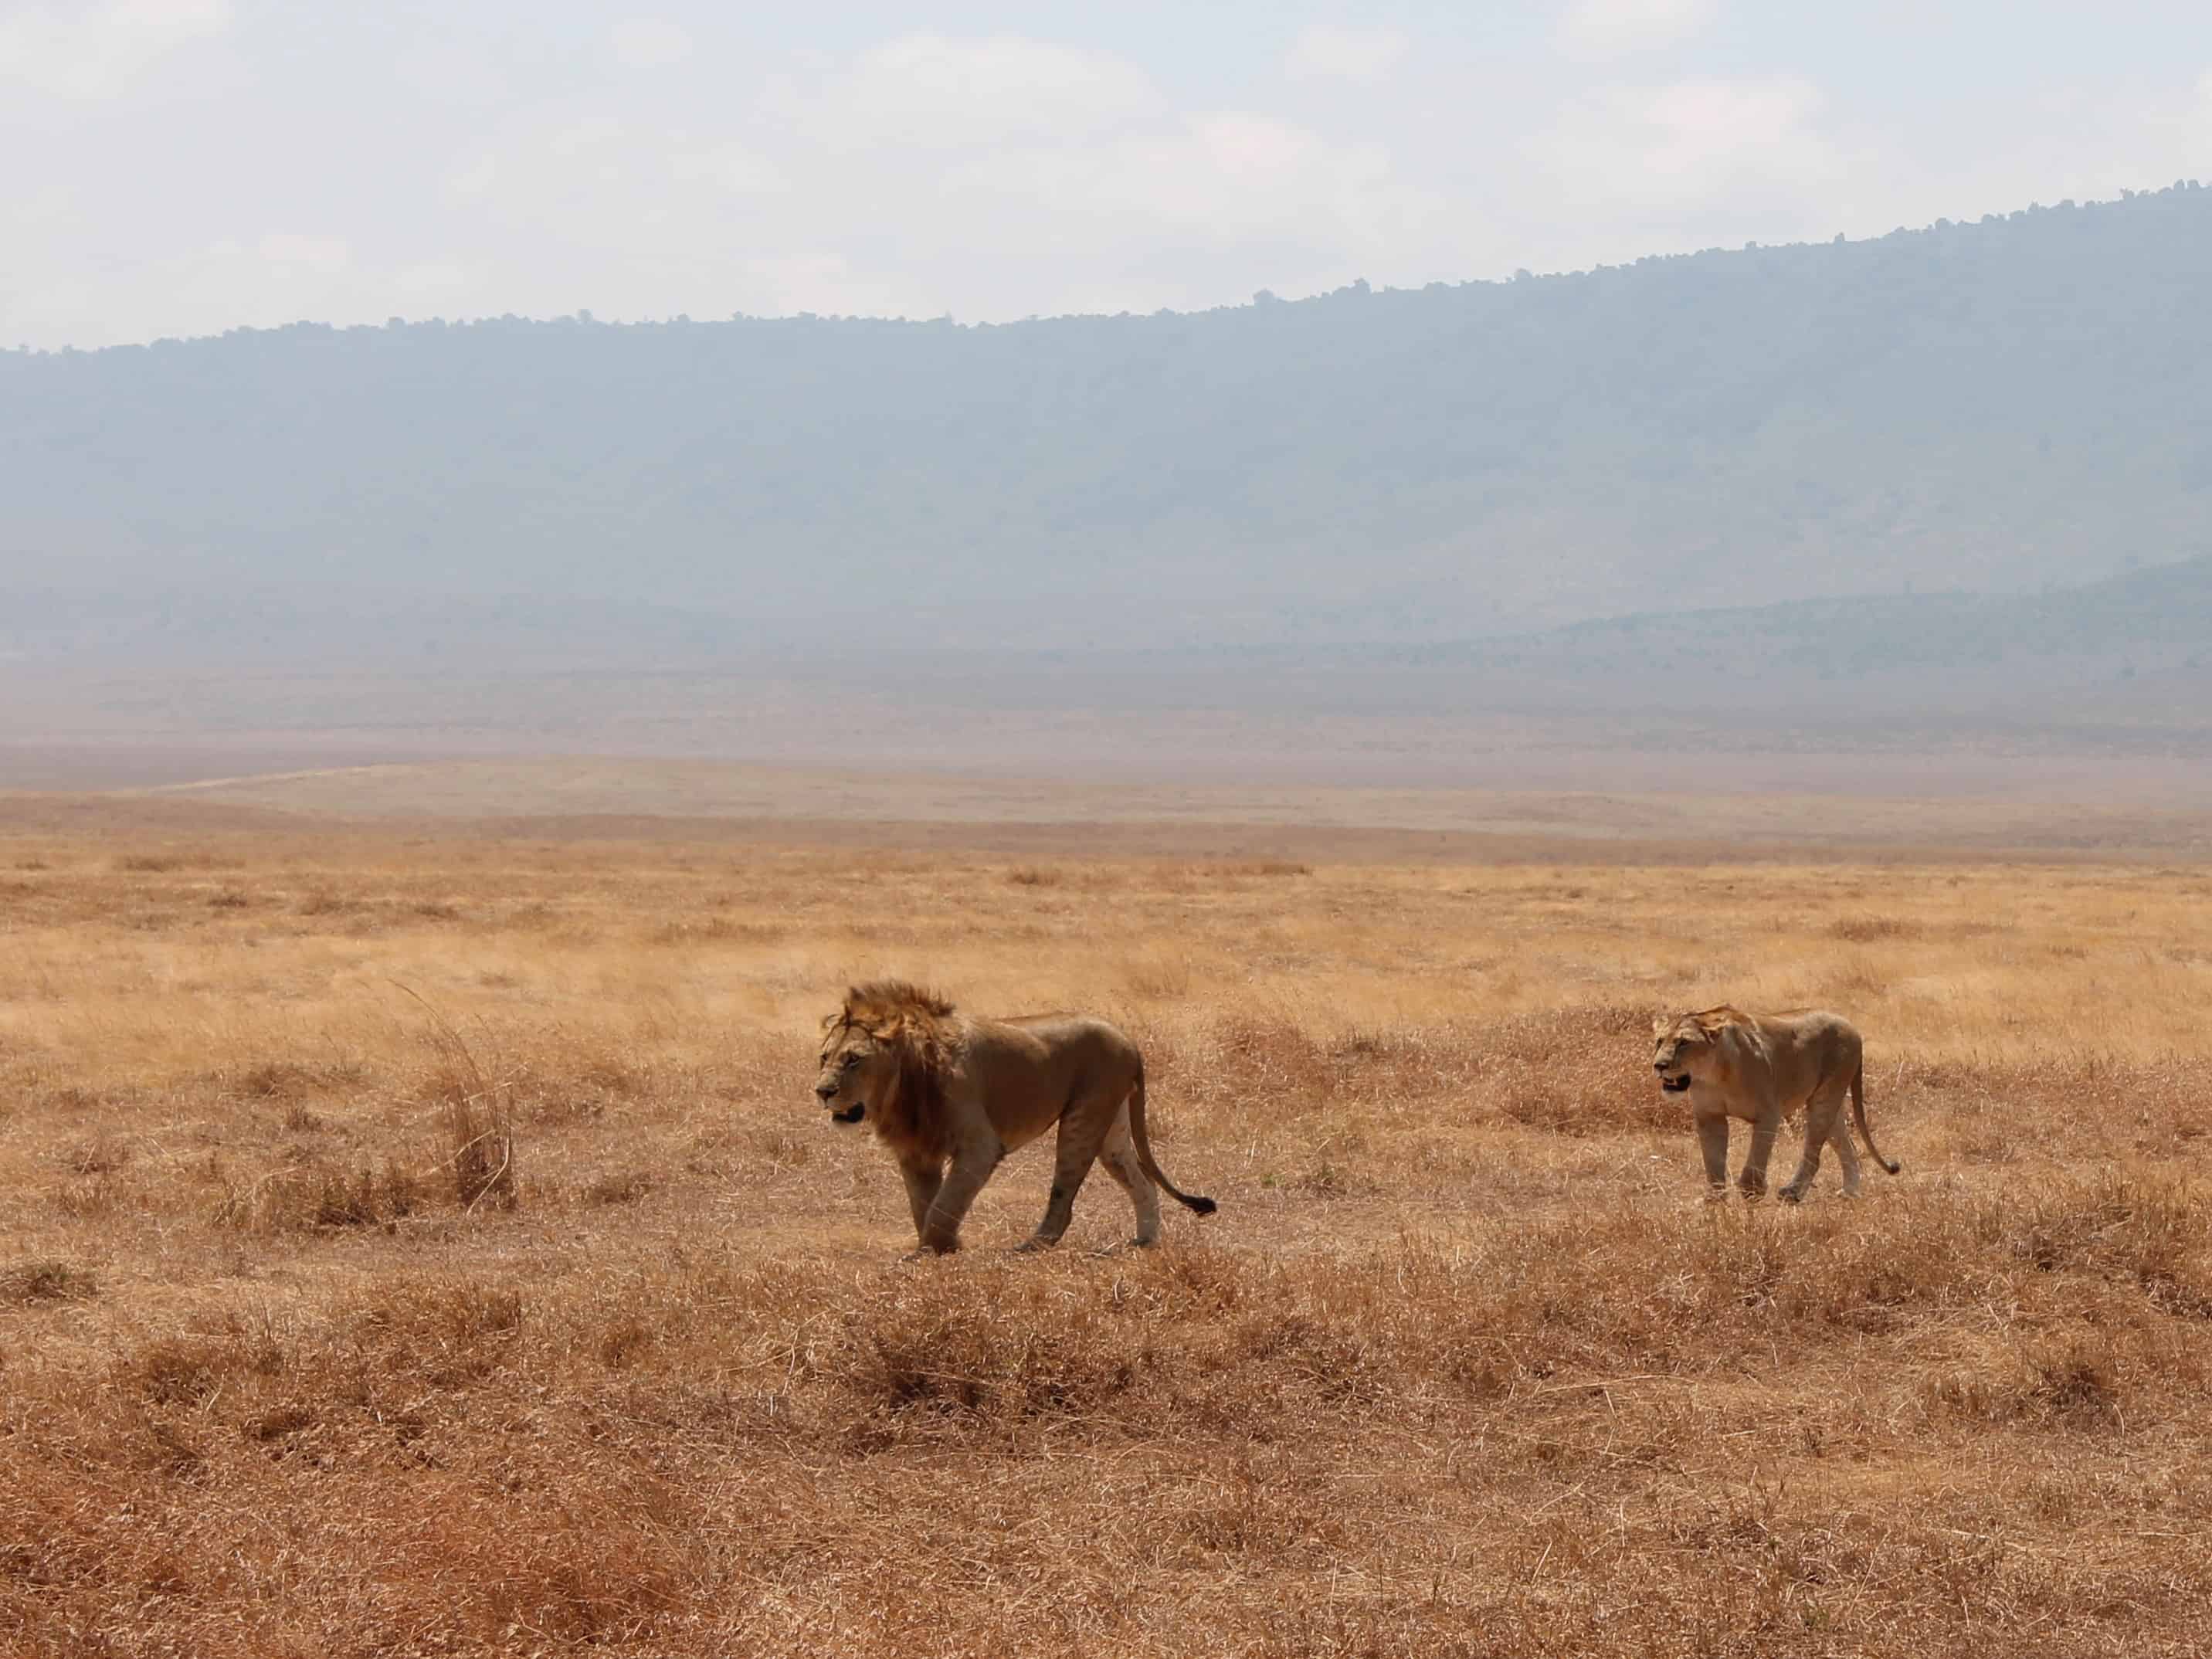 A Safari in Tanzani should be high on your list of places to visit